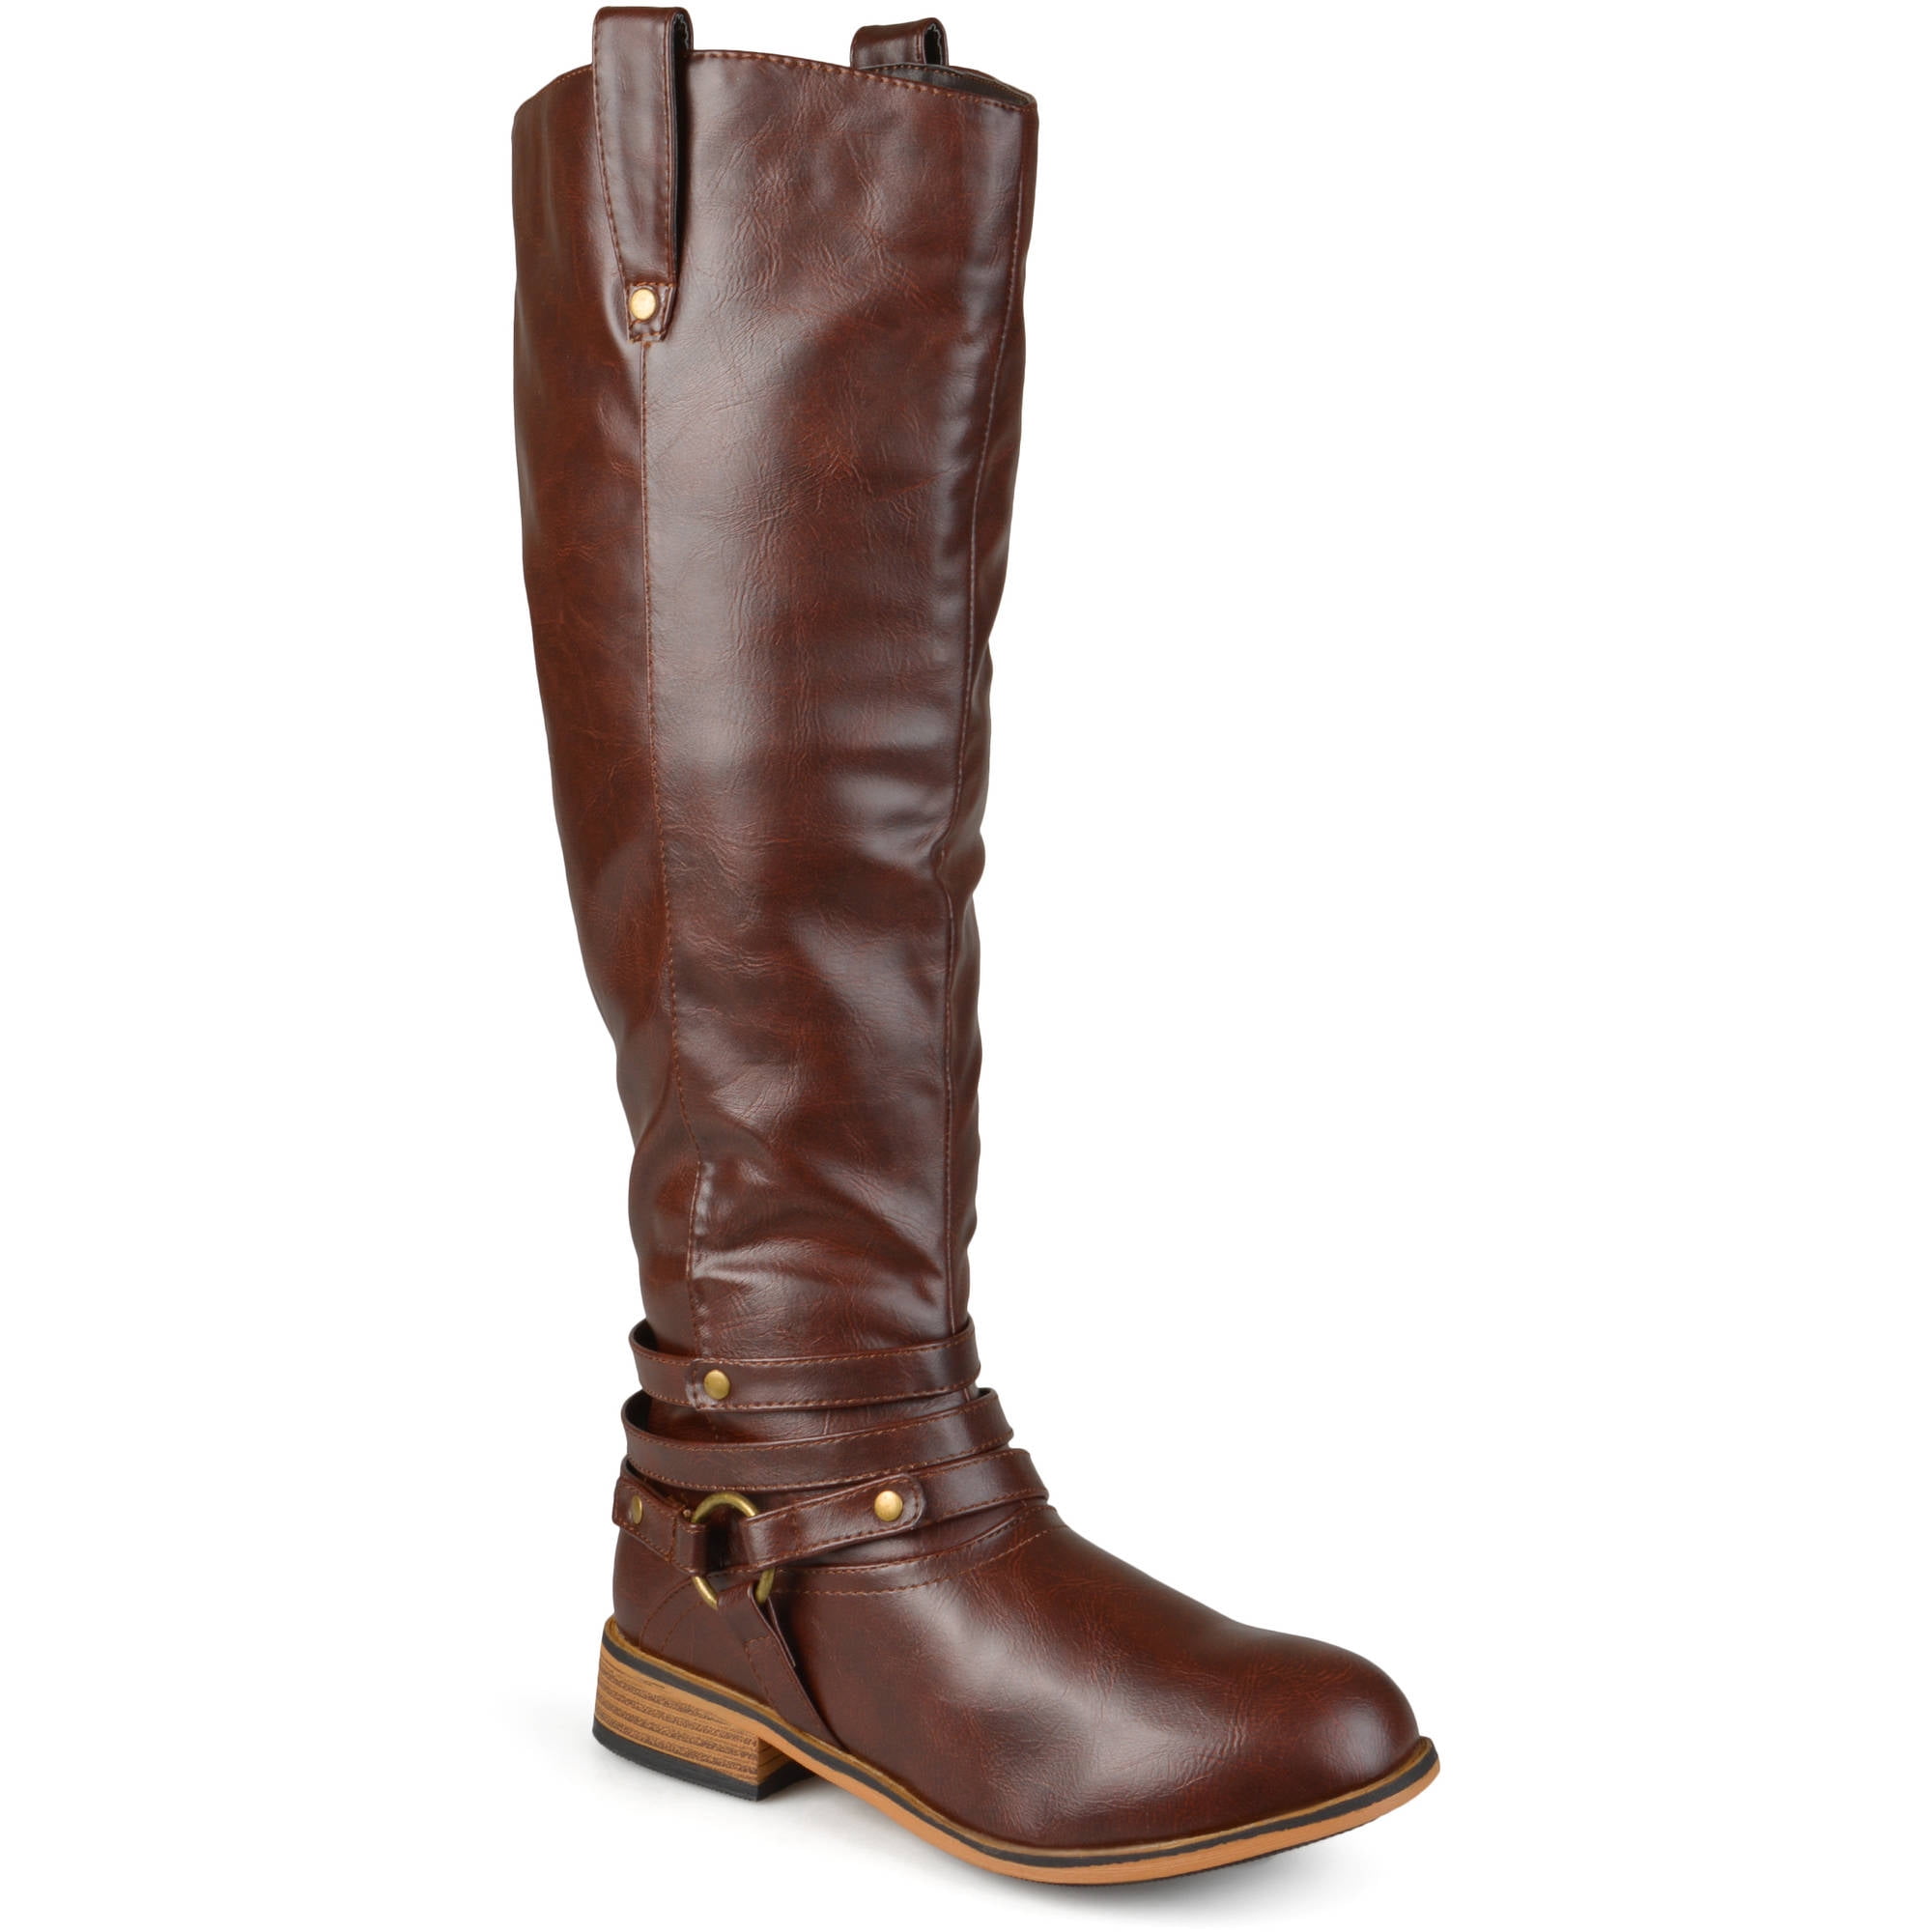 Brinley Co. - Brinely Co. Women's Mid-calf Wide Calf Riding Boots ...